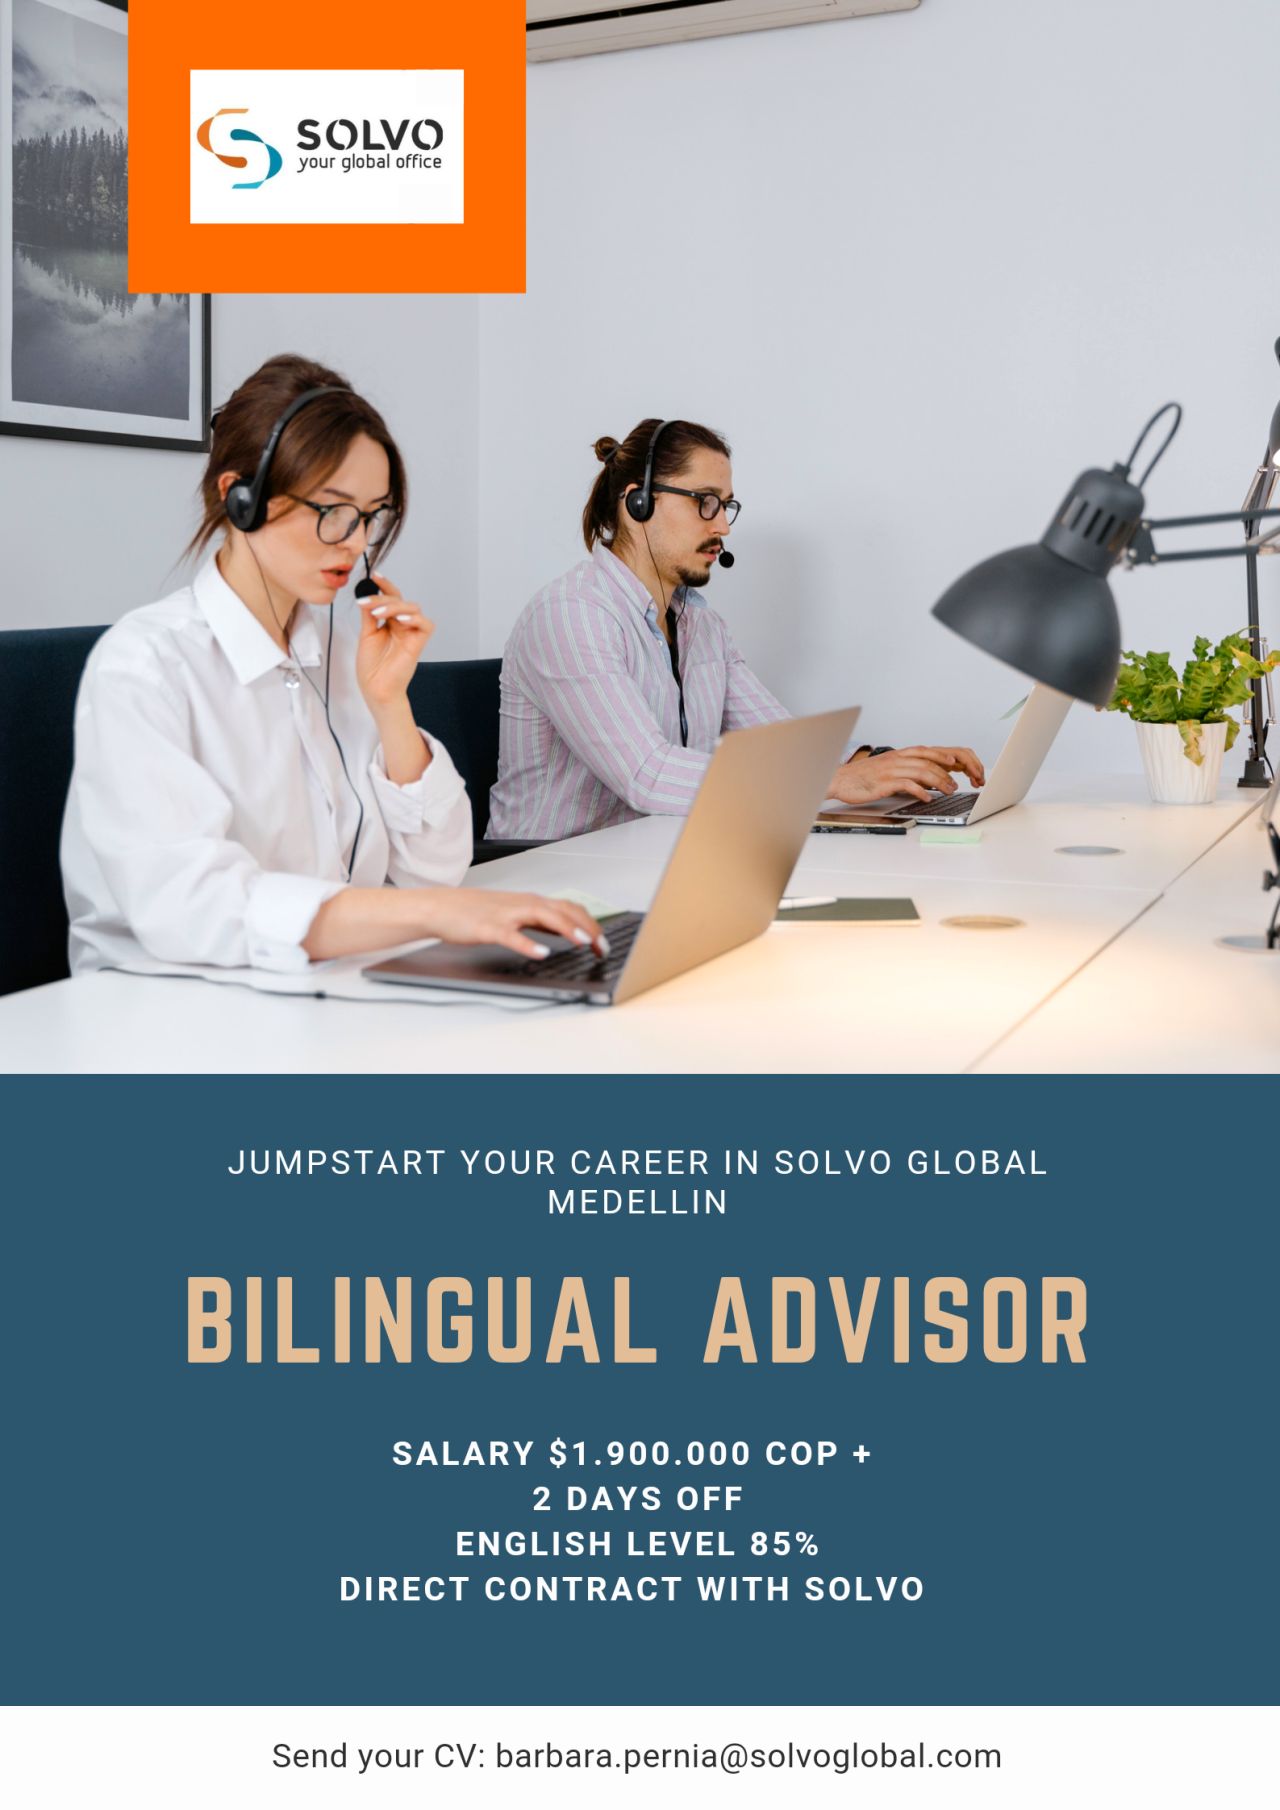 (=, SOLvVO

~) your global office

JUMPSTART YOUR CAREER IN SOLVO GLOBAL
MEDELLIN

BILINGUAL ADVISOR

SALARY $1.900.000 COP +
2 DAYS OFF
ENGLISH LEVEL 85%
DIRECT CONTRACT WITH SOLVO

Send your CV: barbara.pernia@solvoglobal.com